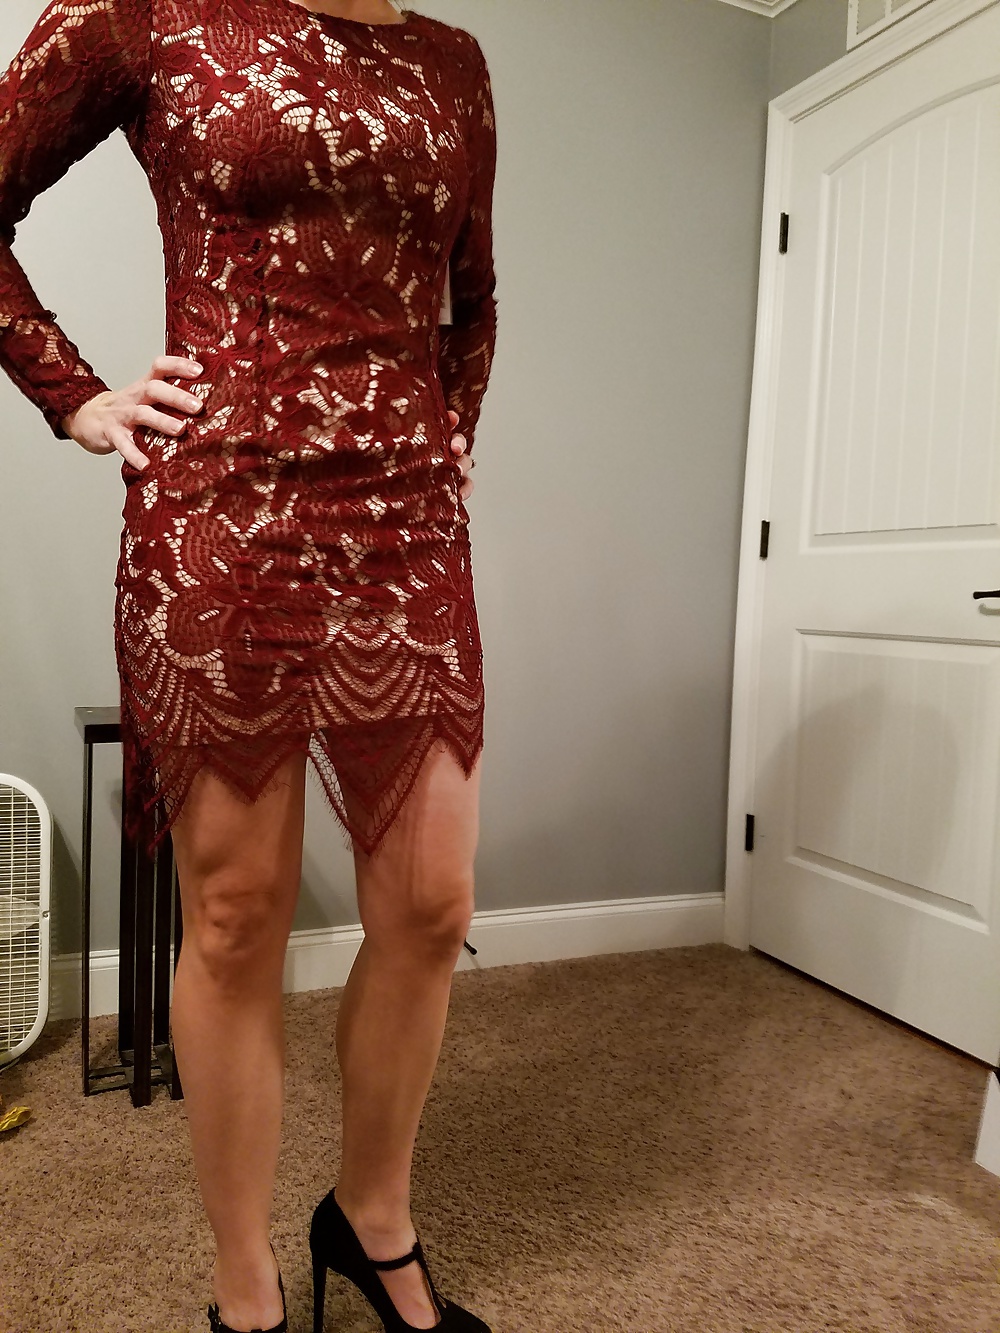 Hot_pawg_wifey_in_a_sexy_dress_ (3/14)